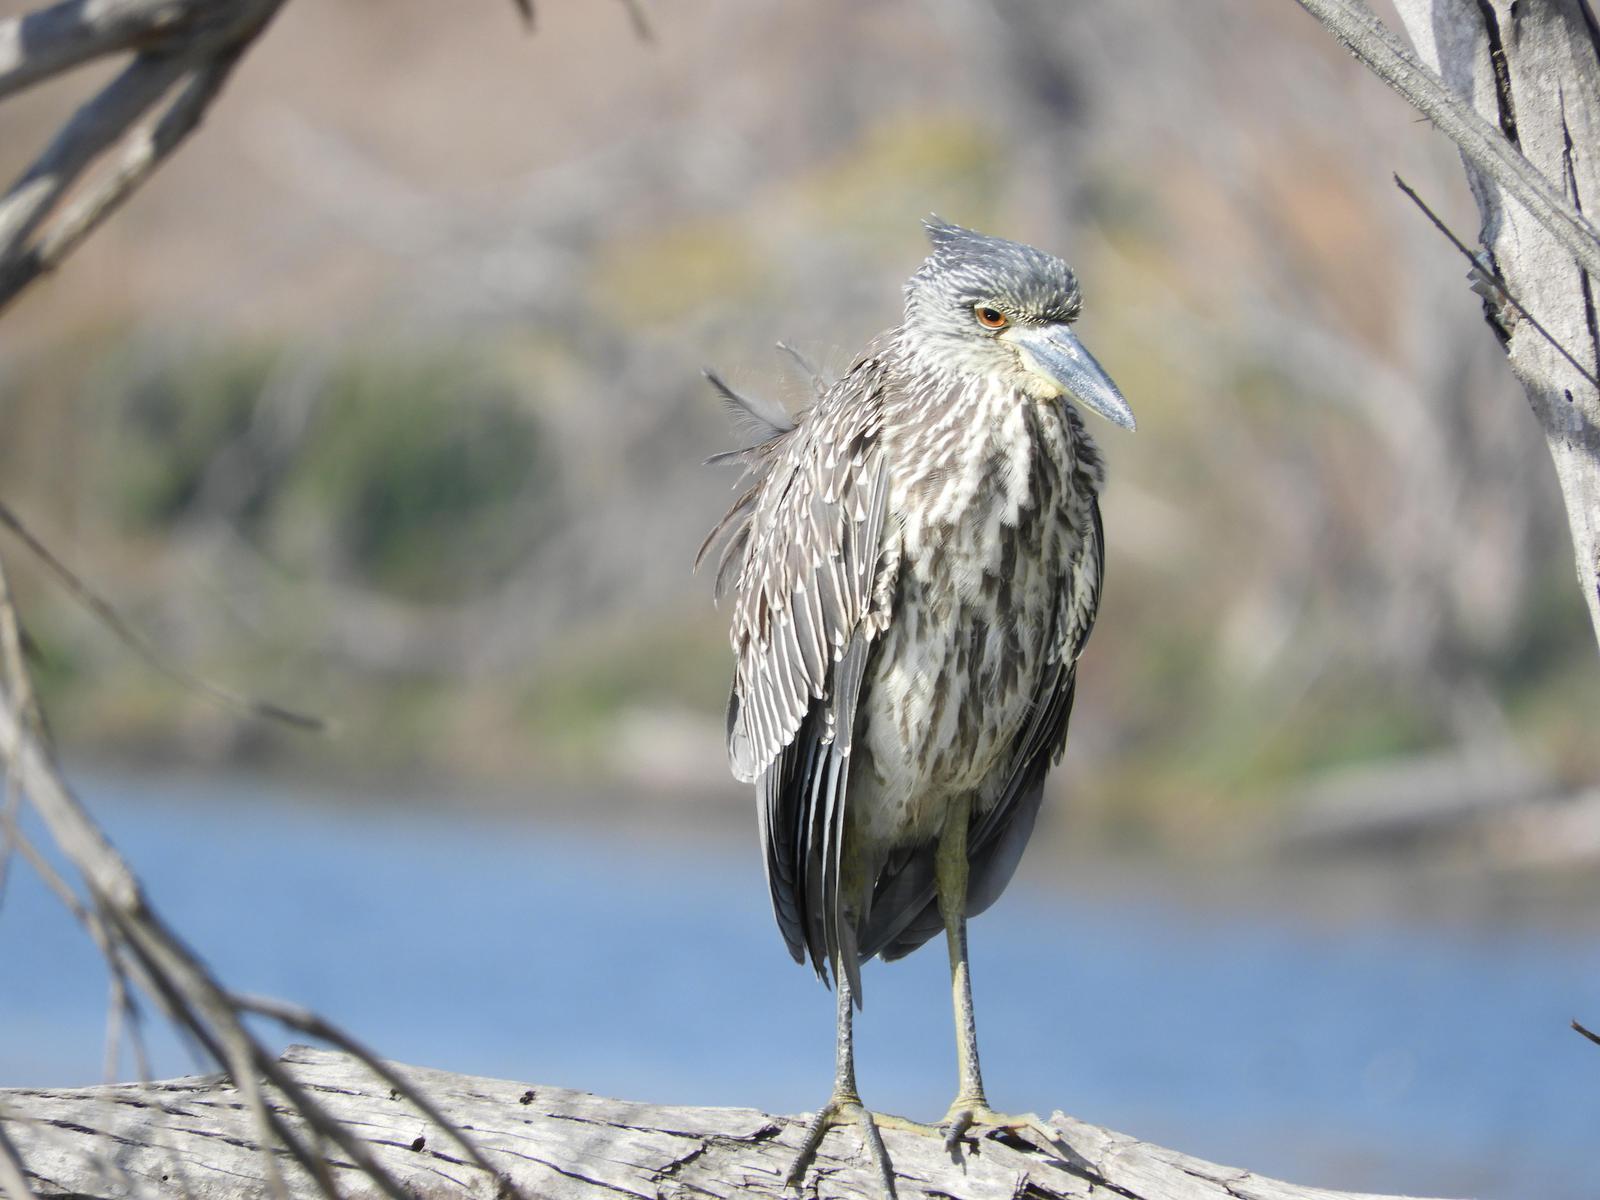 Yellow-crowned Night-Heron Photo by Yvonne Burch-Hartley